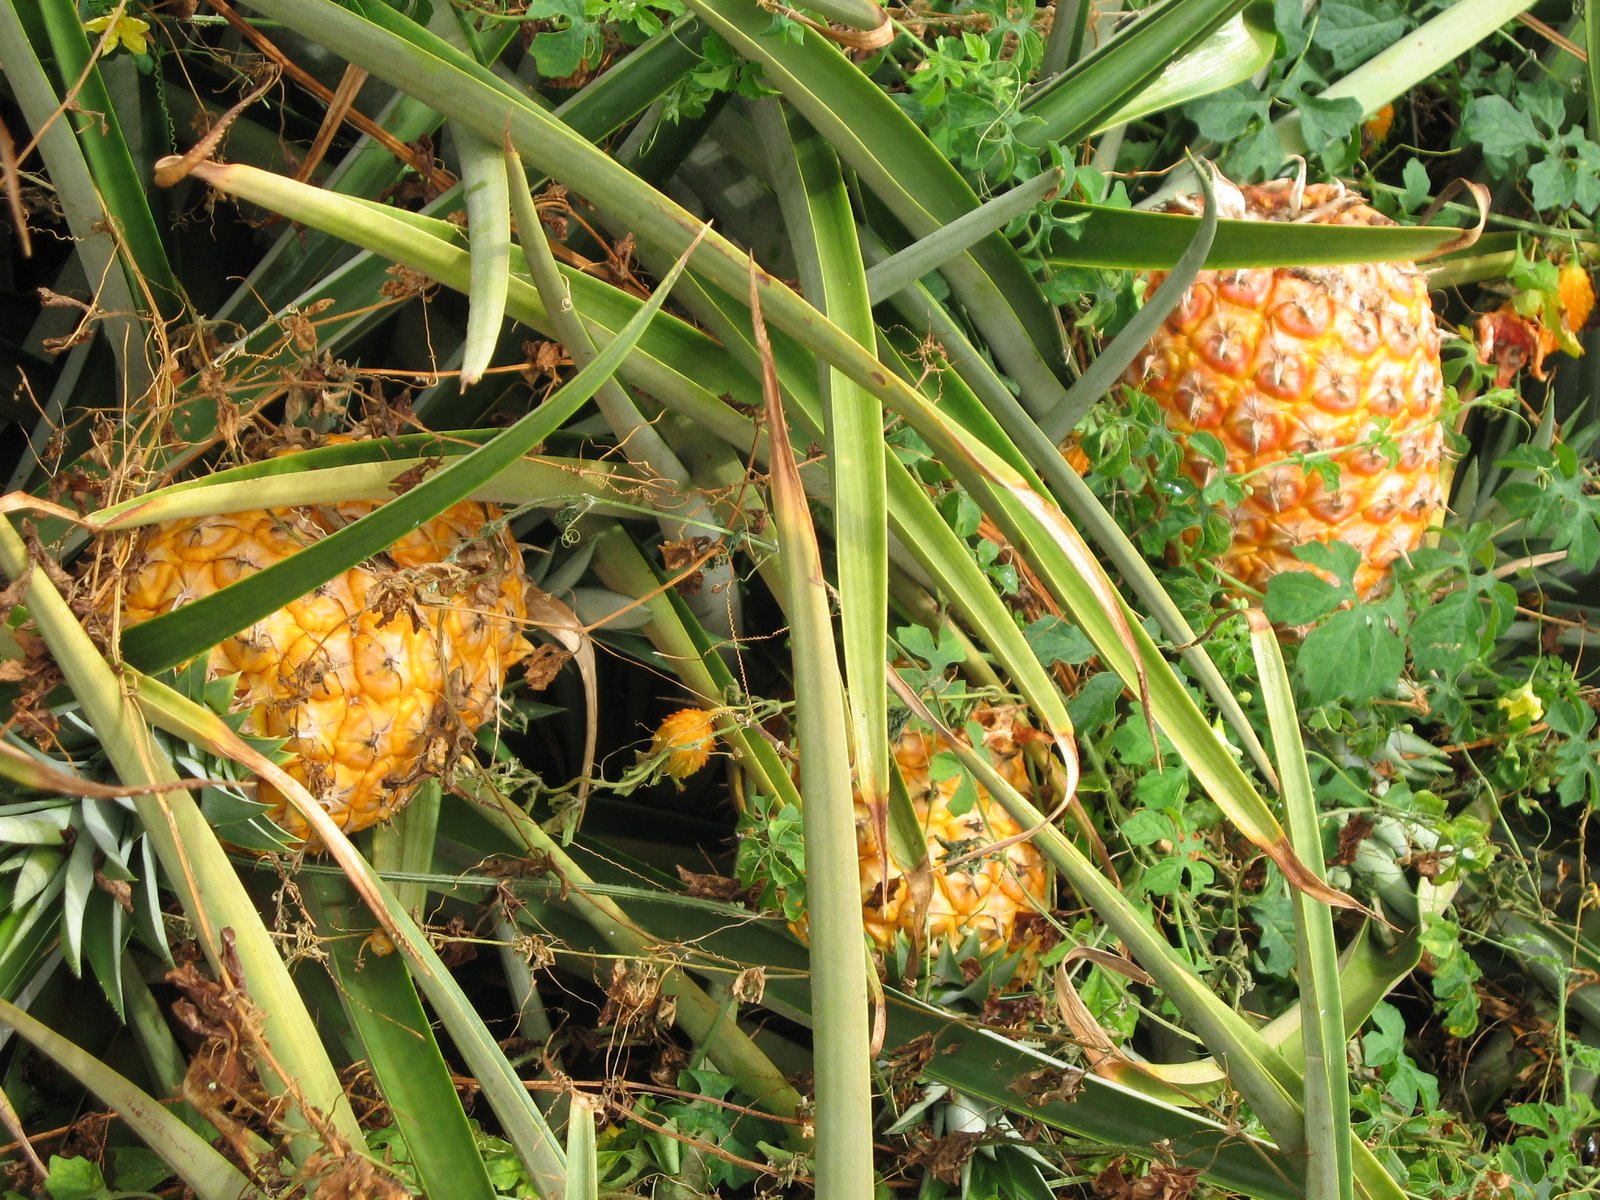 'Ono ripe pineapples in the field